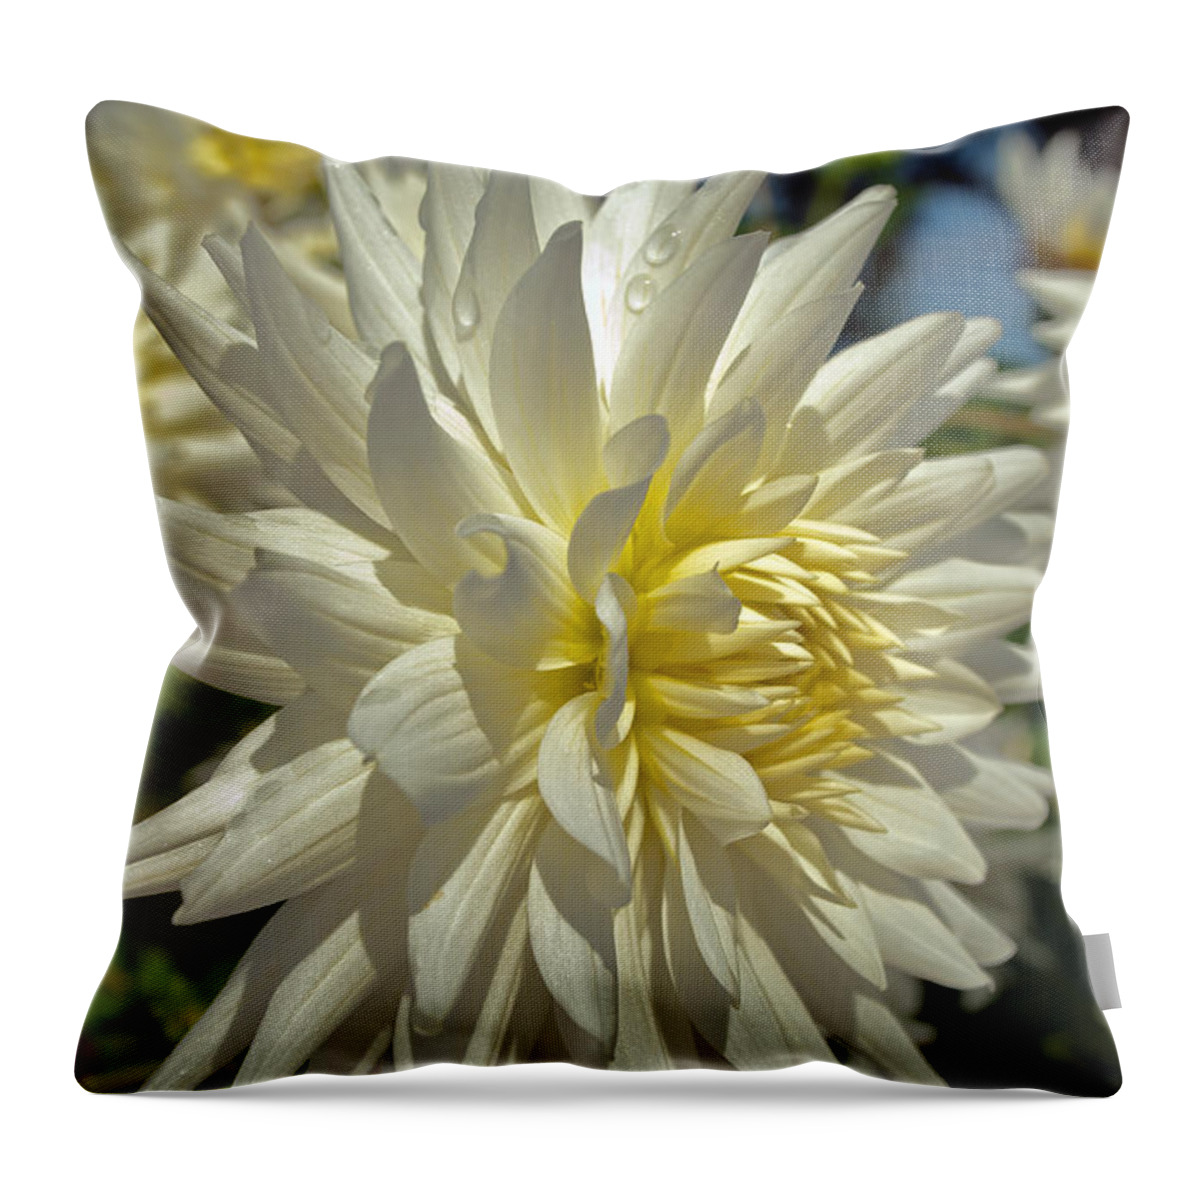 Flower Throw Pillow featuring the photograph Sweating Dahlia by Tikvah's Hope